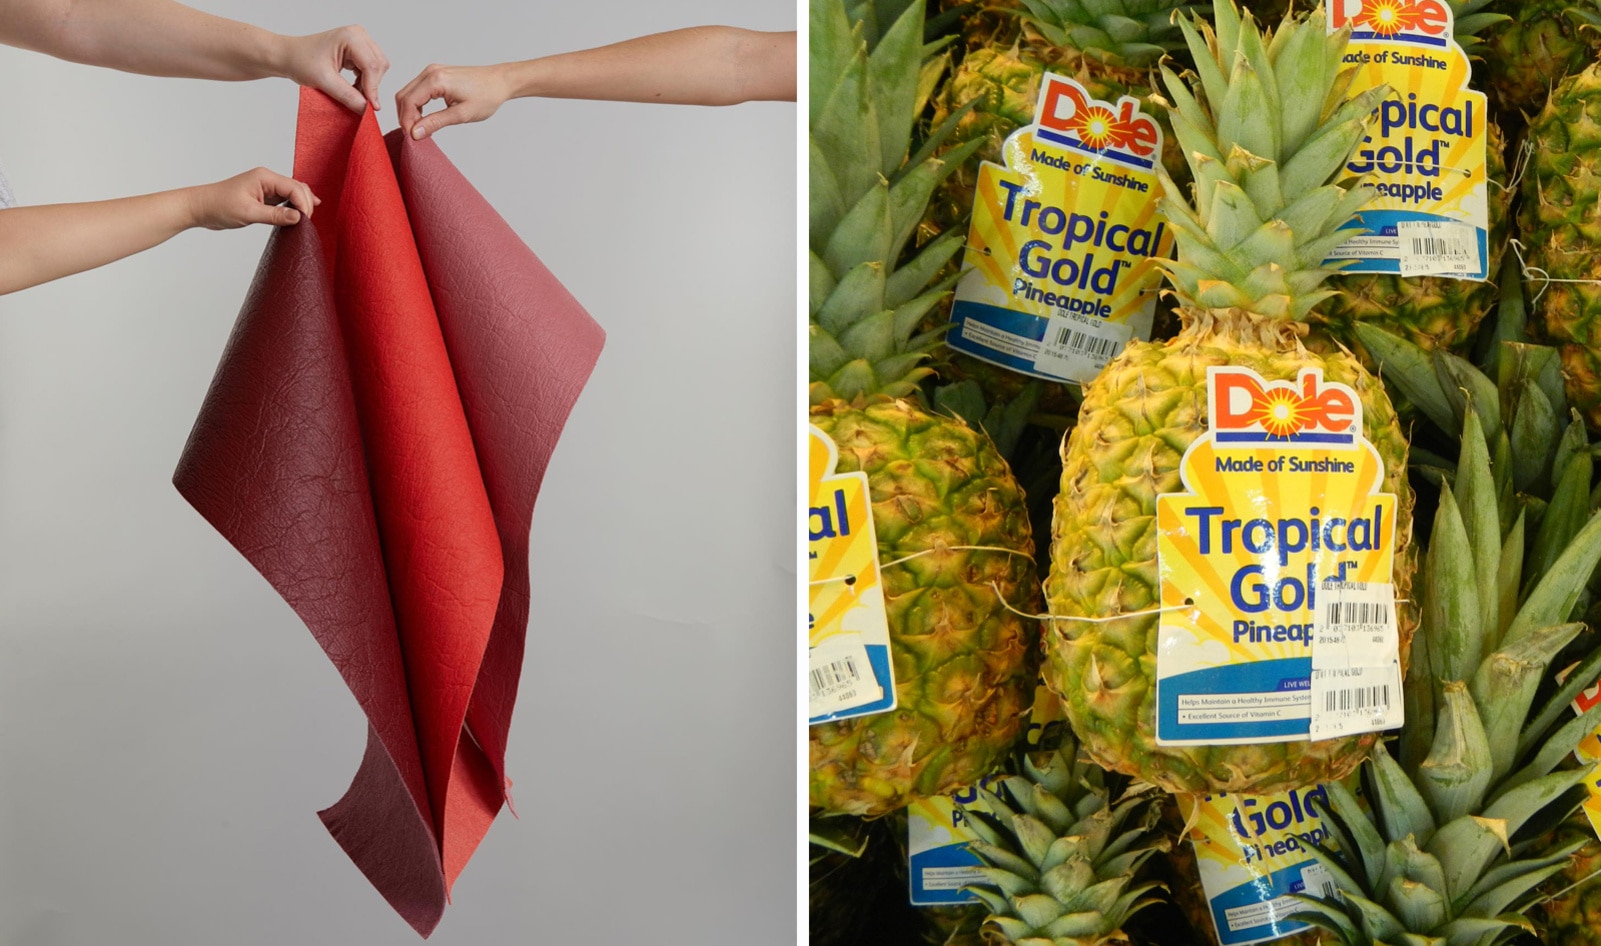 Dole Strikes Deal to Turn Its Pineapple Leaves into Vegan Leather